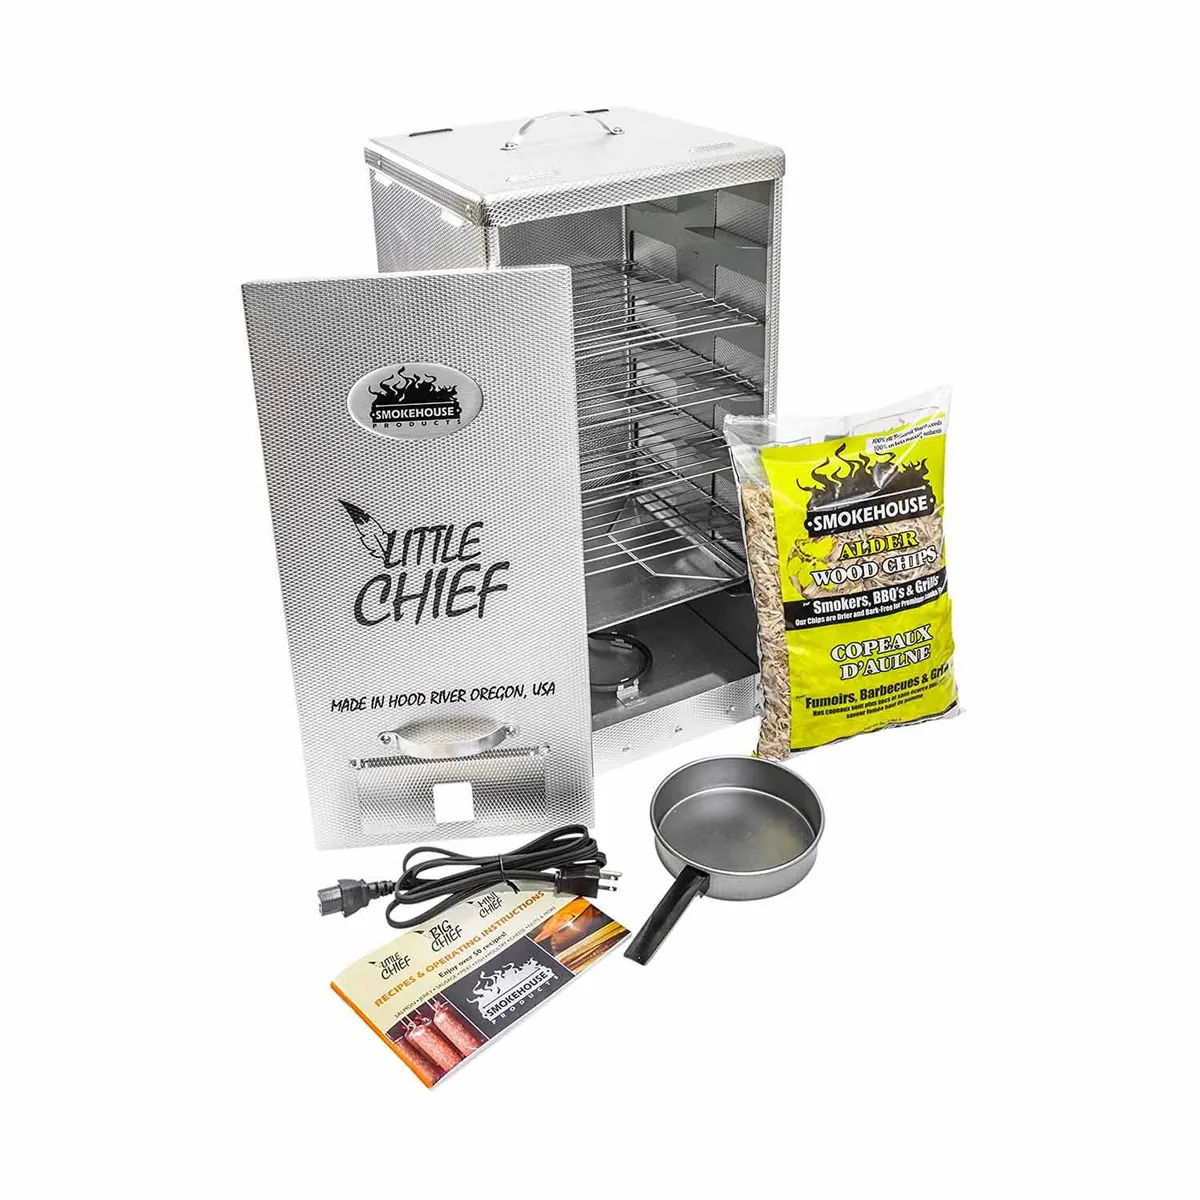 Smokehouse Products Little Chief Load Smoker